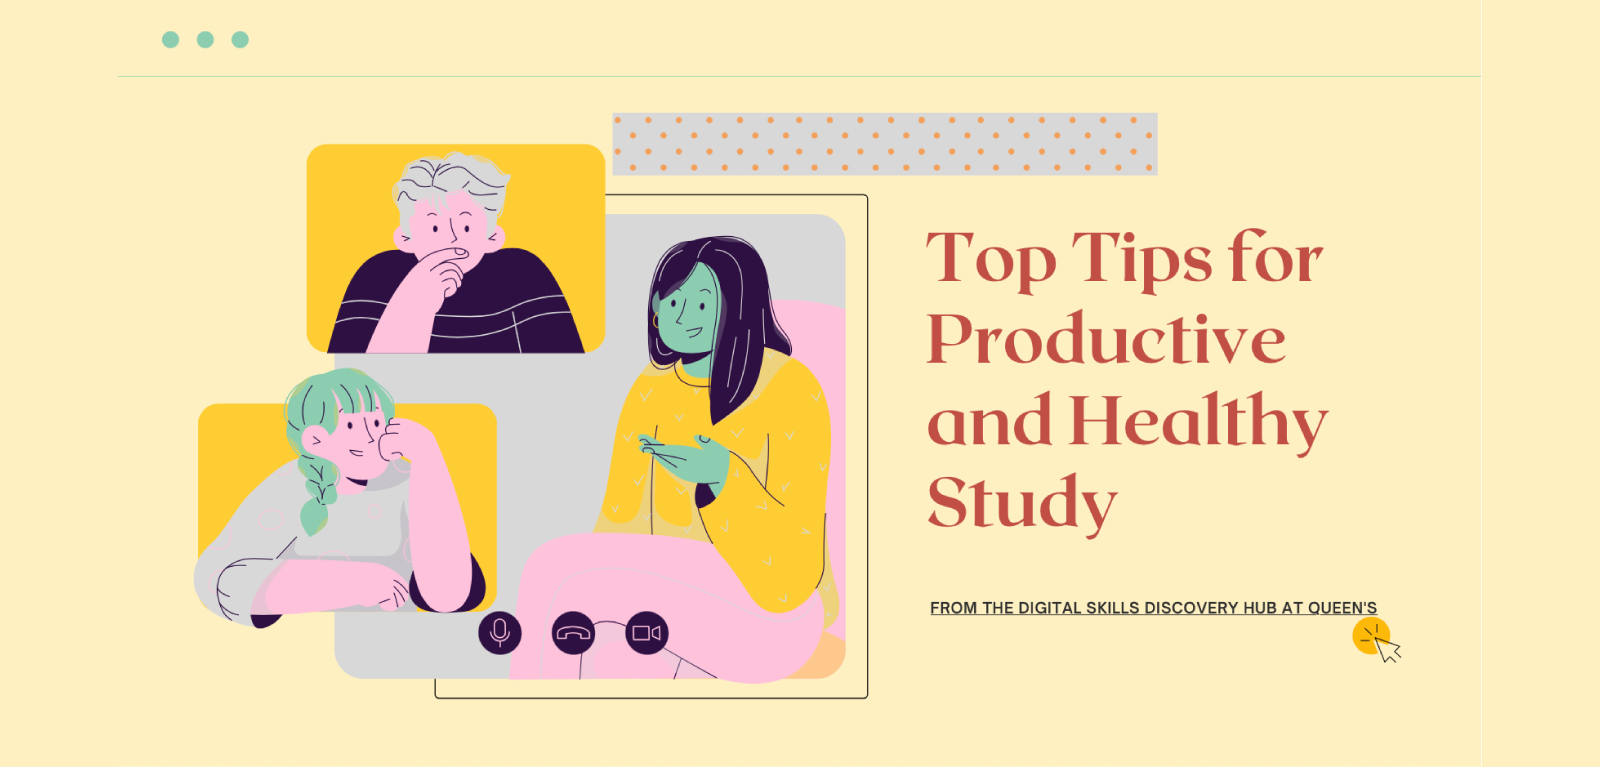 Top Tips for Productive and Healthy Study